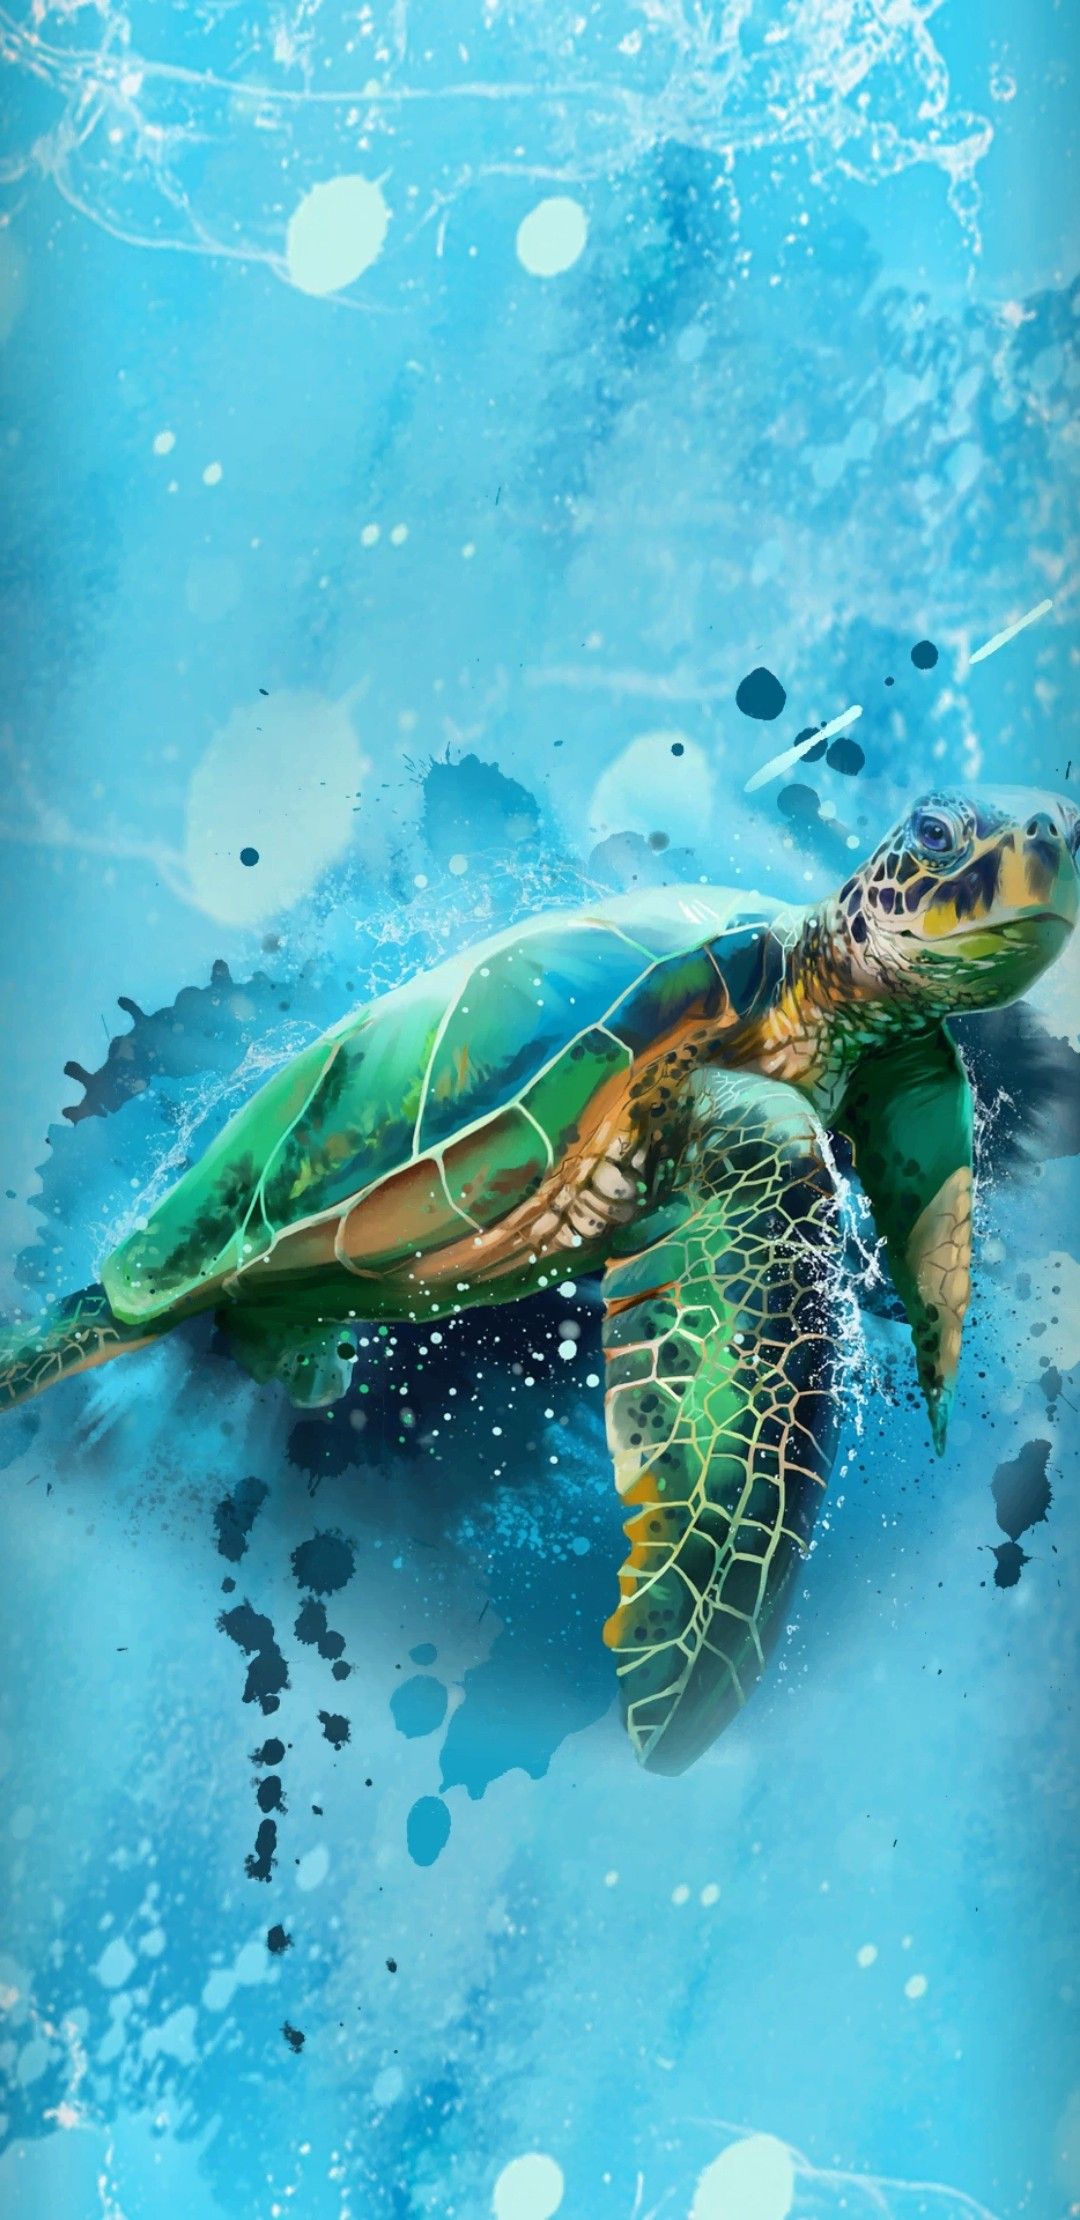 A painting of a turtle swimming in the ocean - Sea turtle